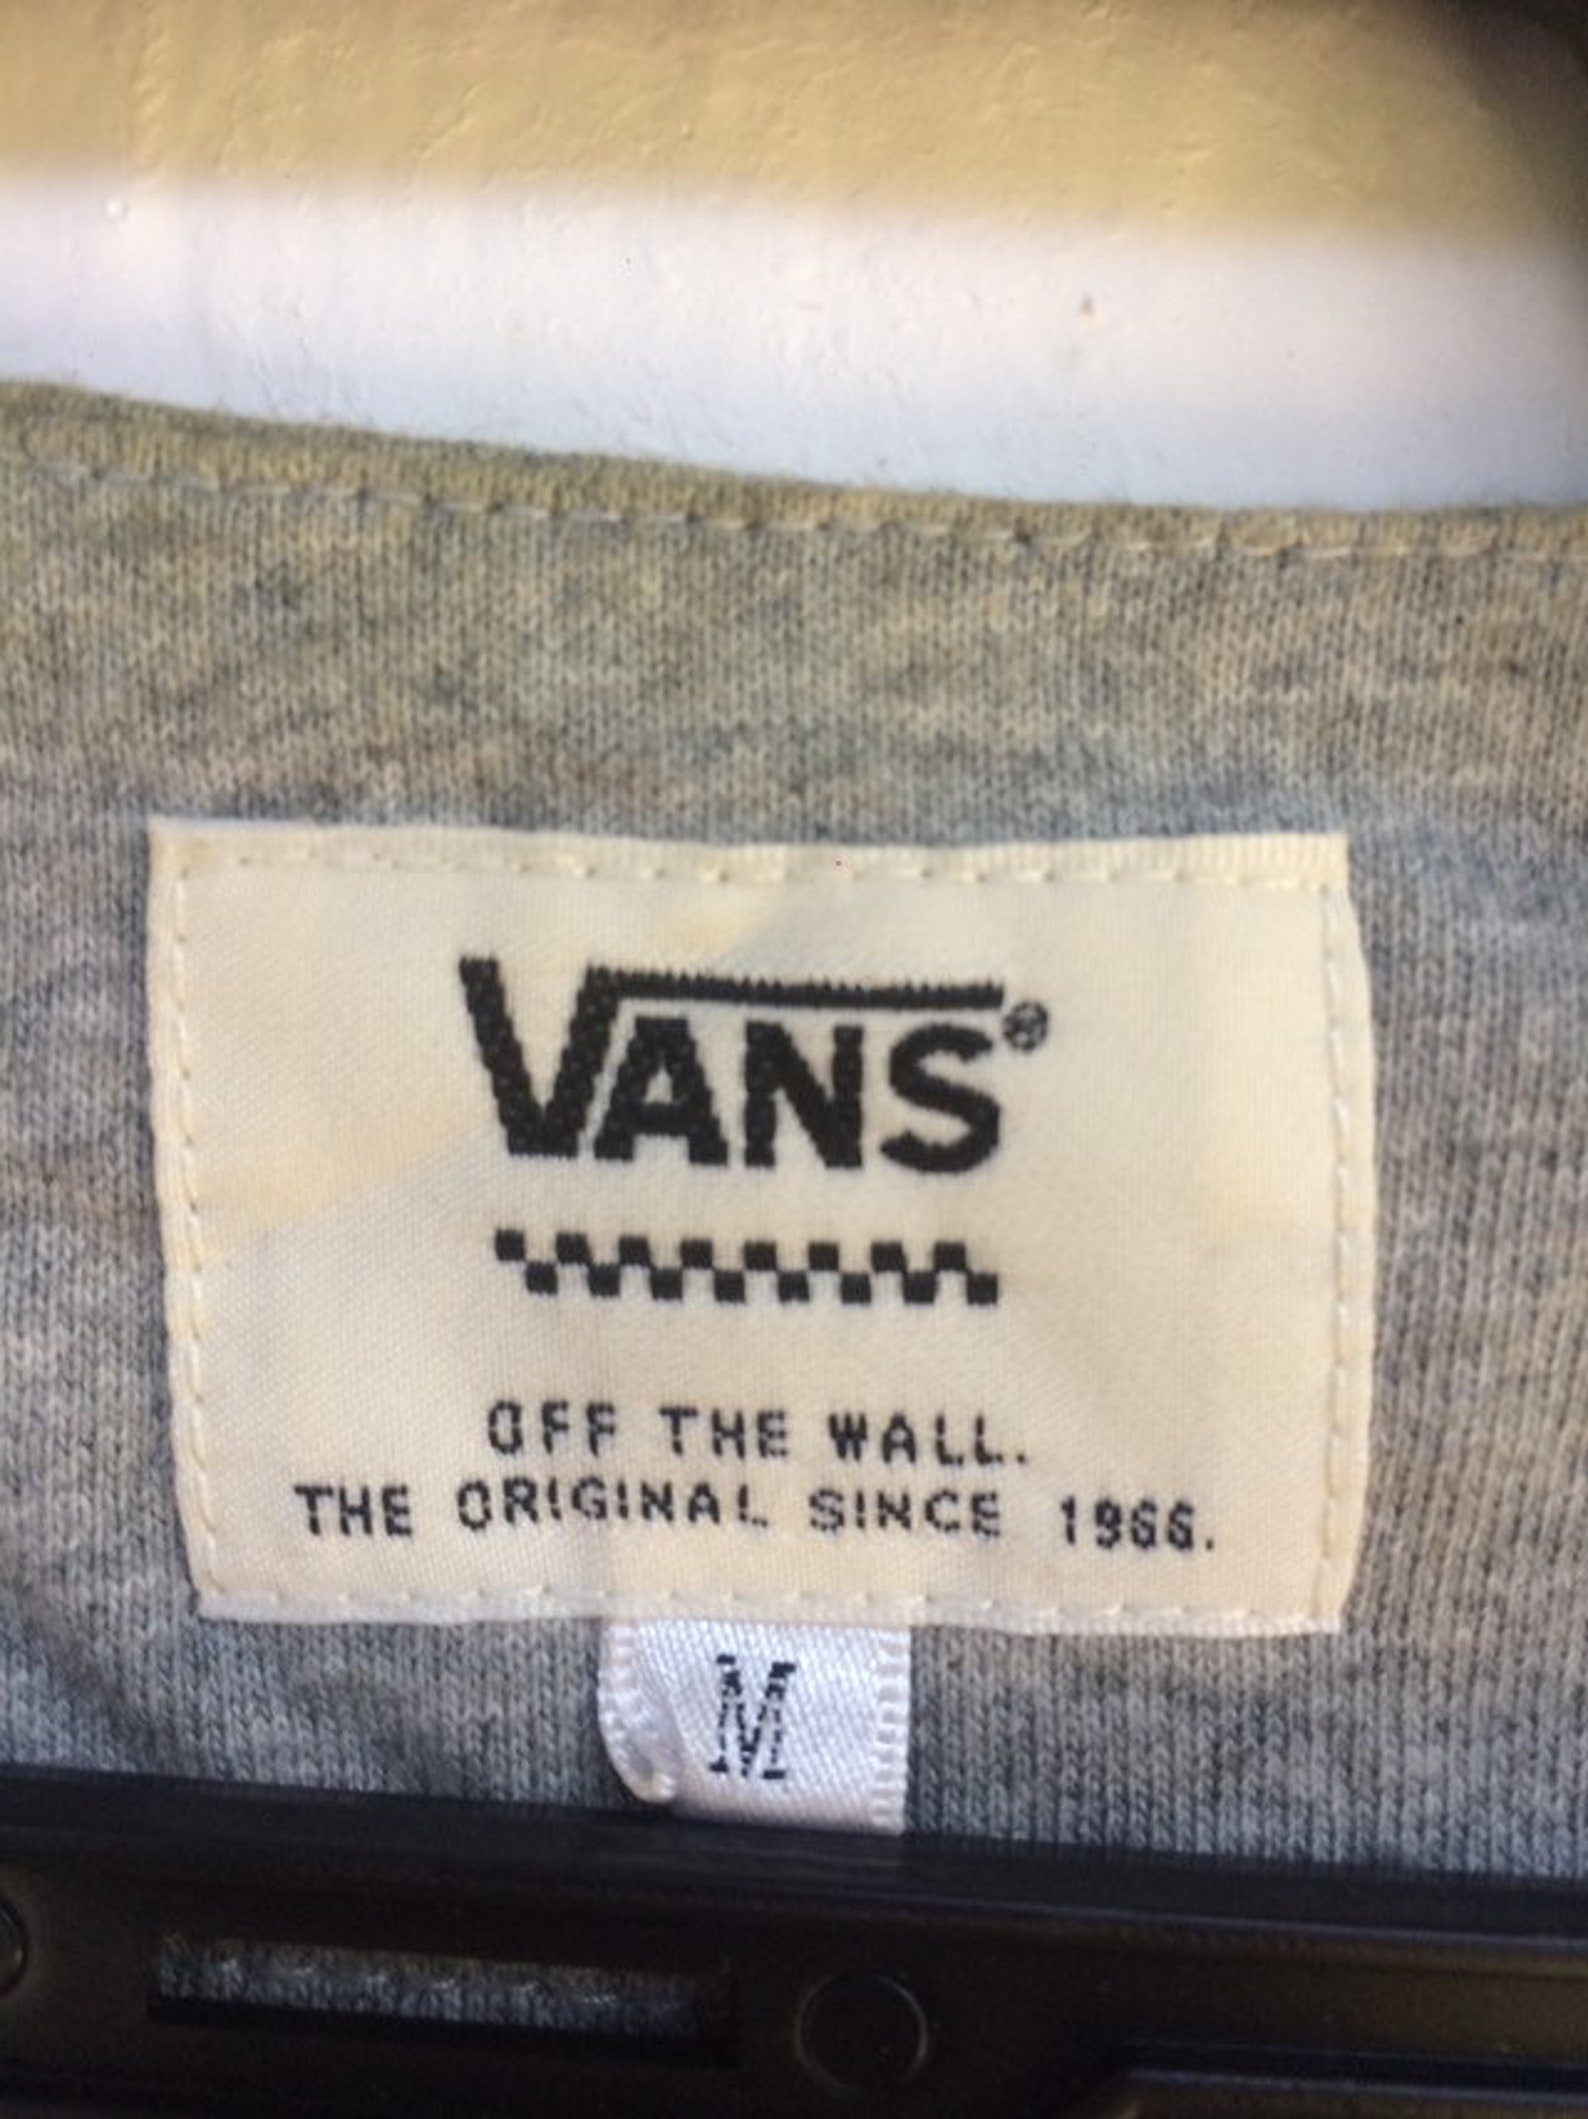 Vintage Vans 66 Off The Wall The Original Since 1966 | Etsy